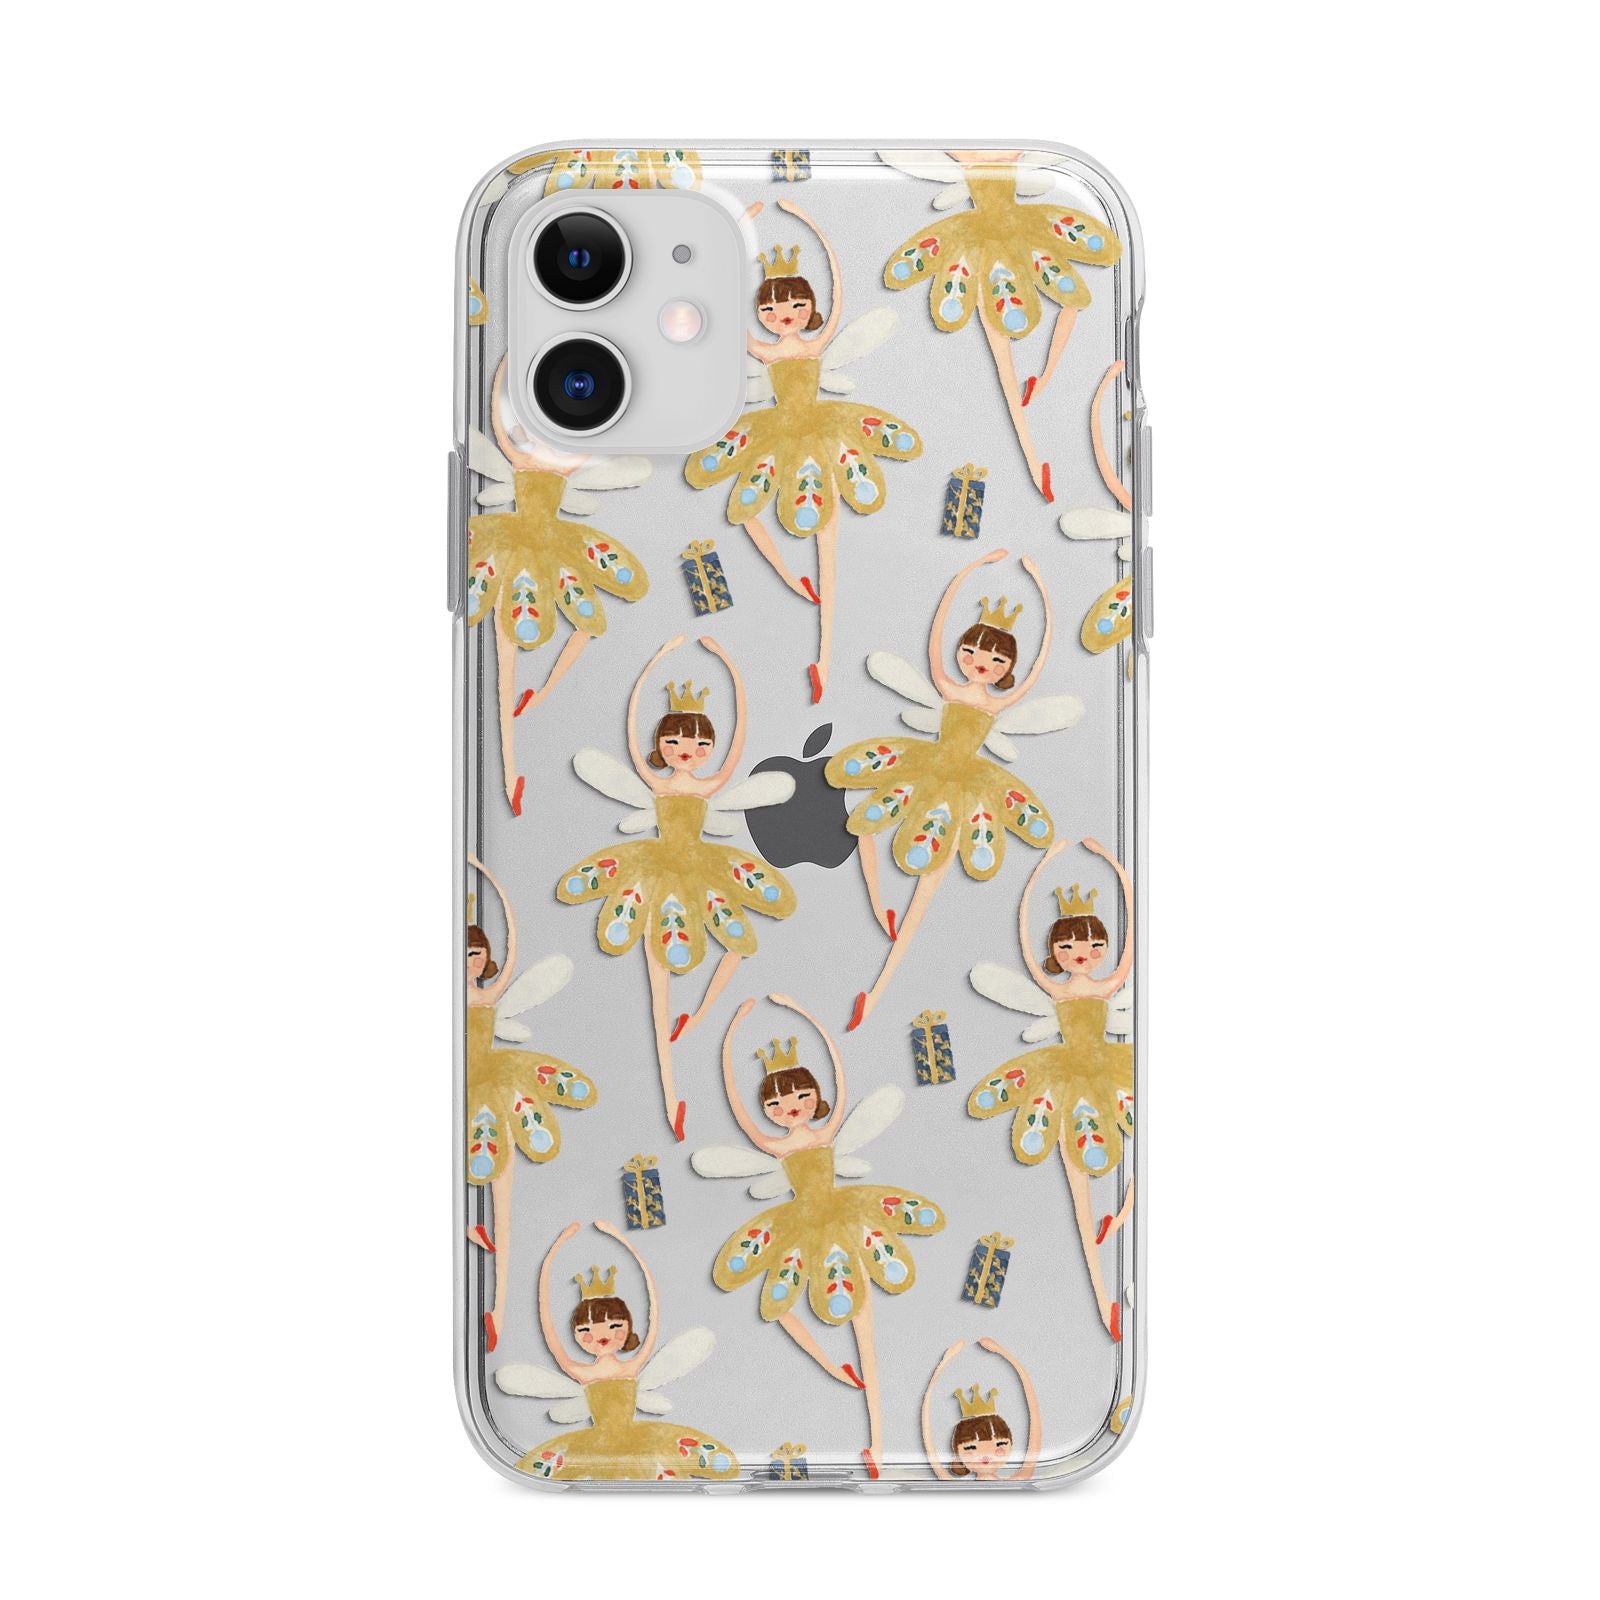 Dancing ballerina princess Apple iPhone 11 in White with Bumper Case